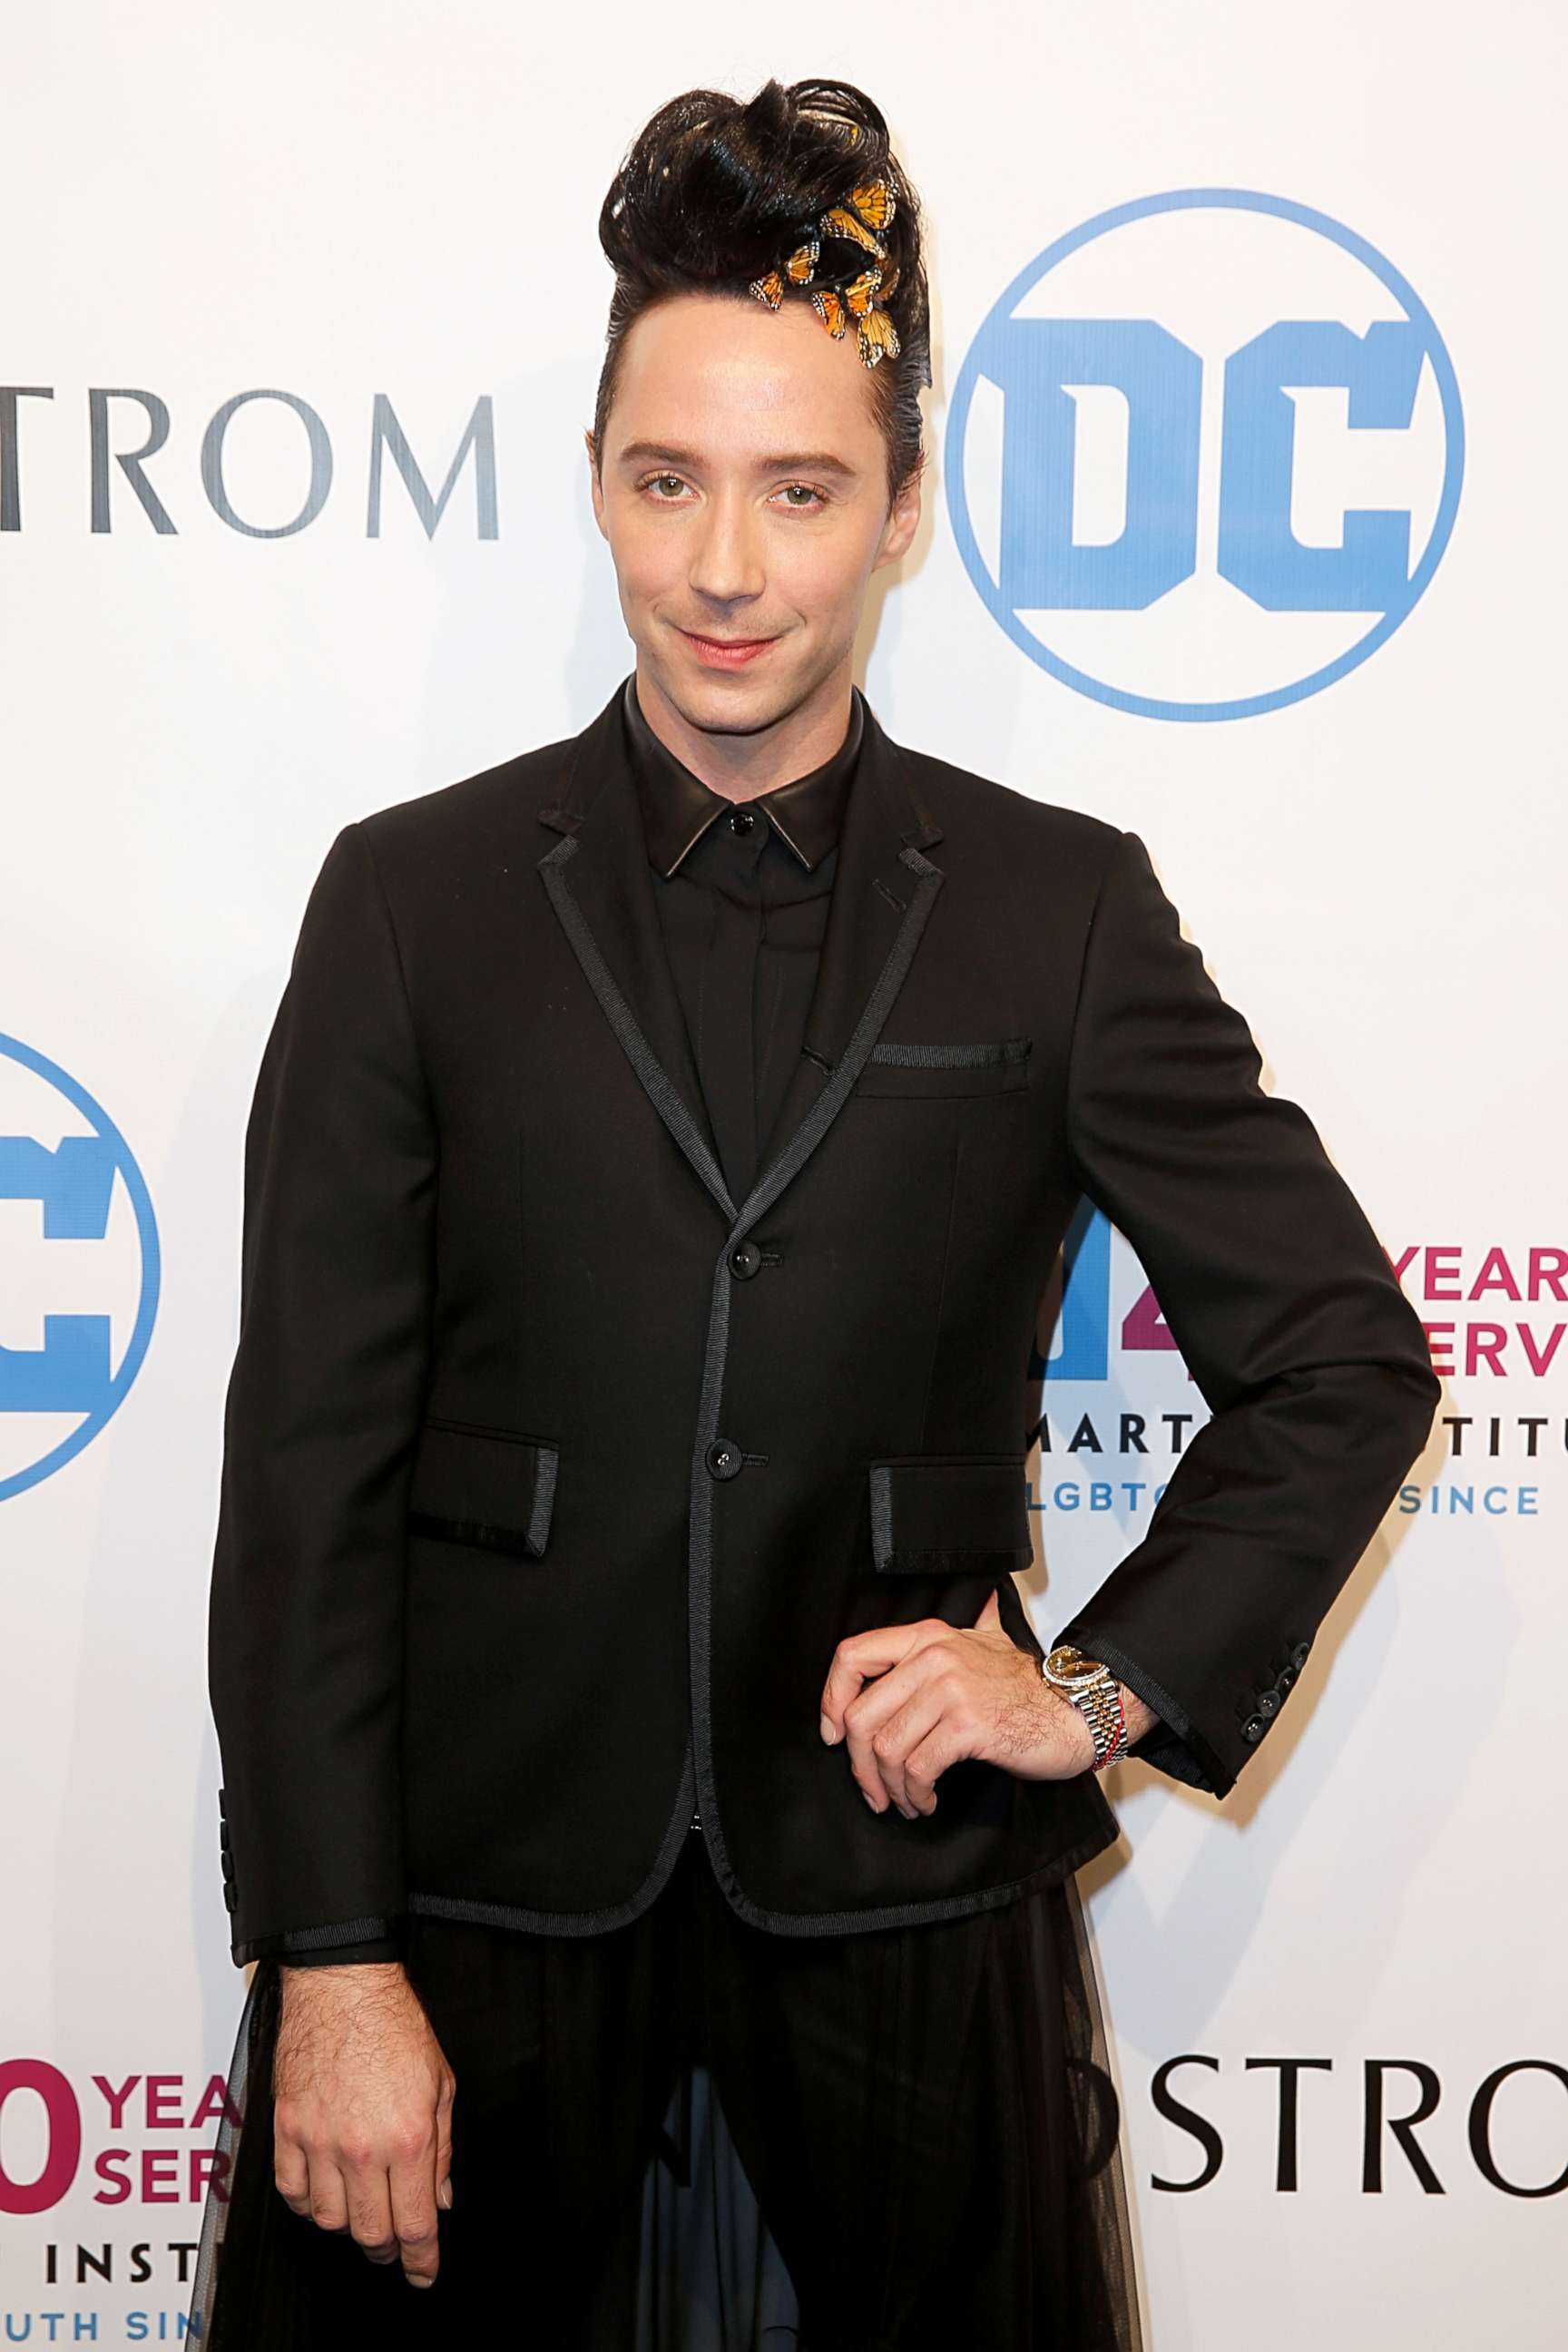 PHOTO: Johnny Weir attends the 2019 Emery Awards at Cipriani Wall Street on Nov. 6, 2019 in New York City.